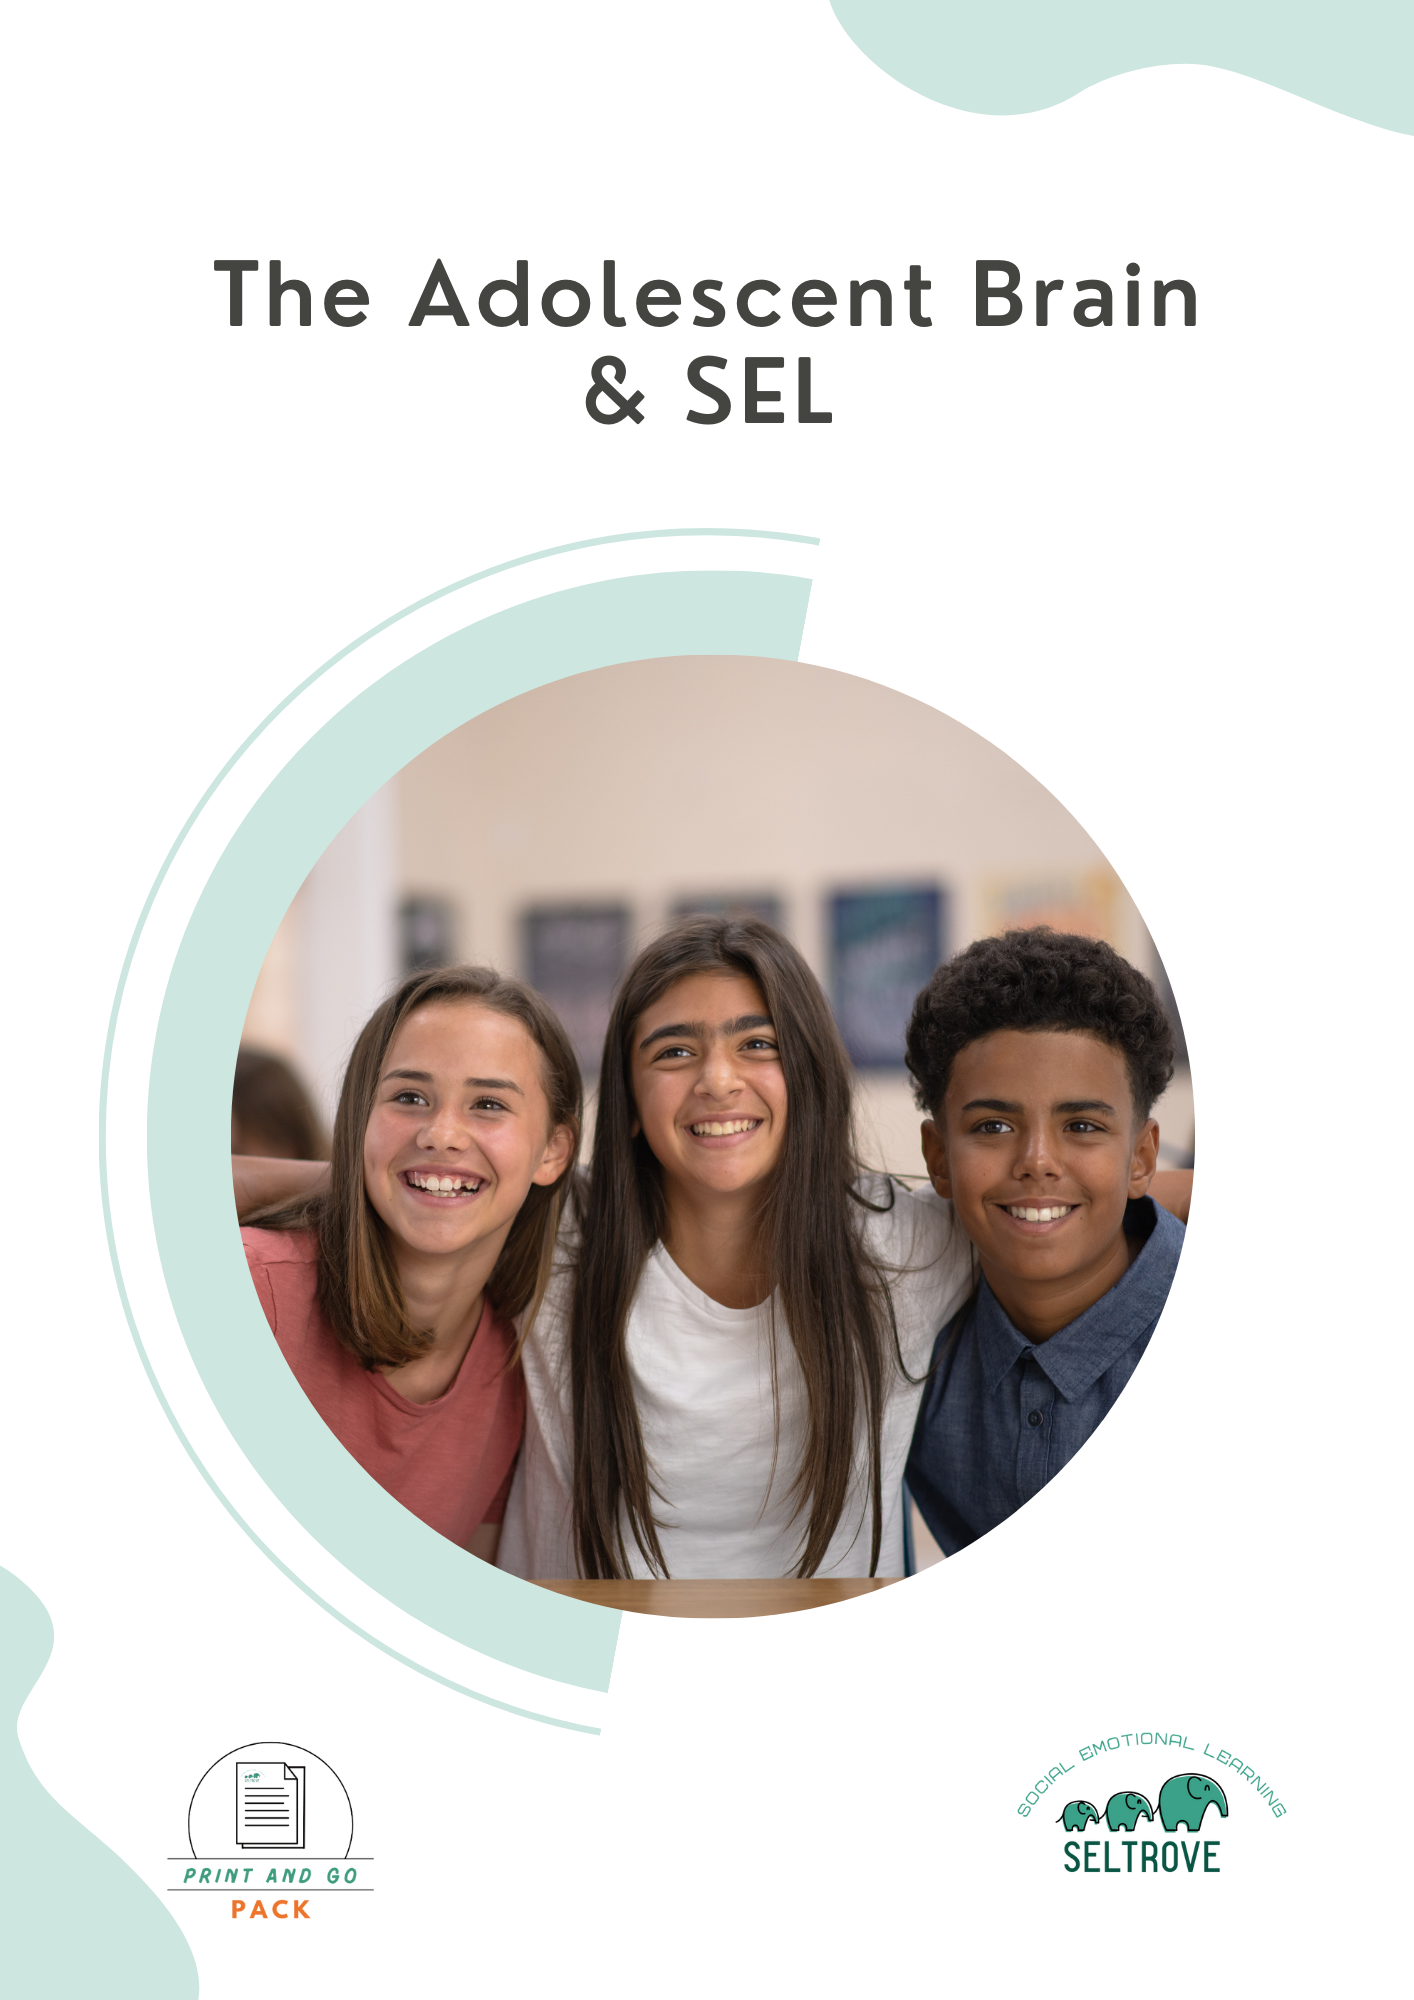 The Adolescent Brain & SEL (Print and Go Pack)